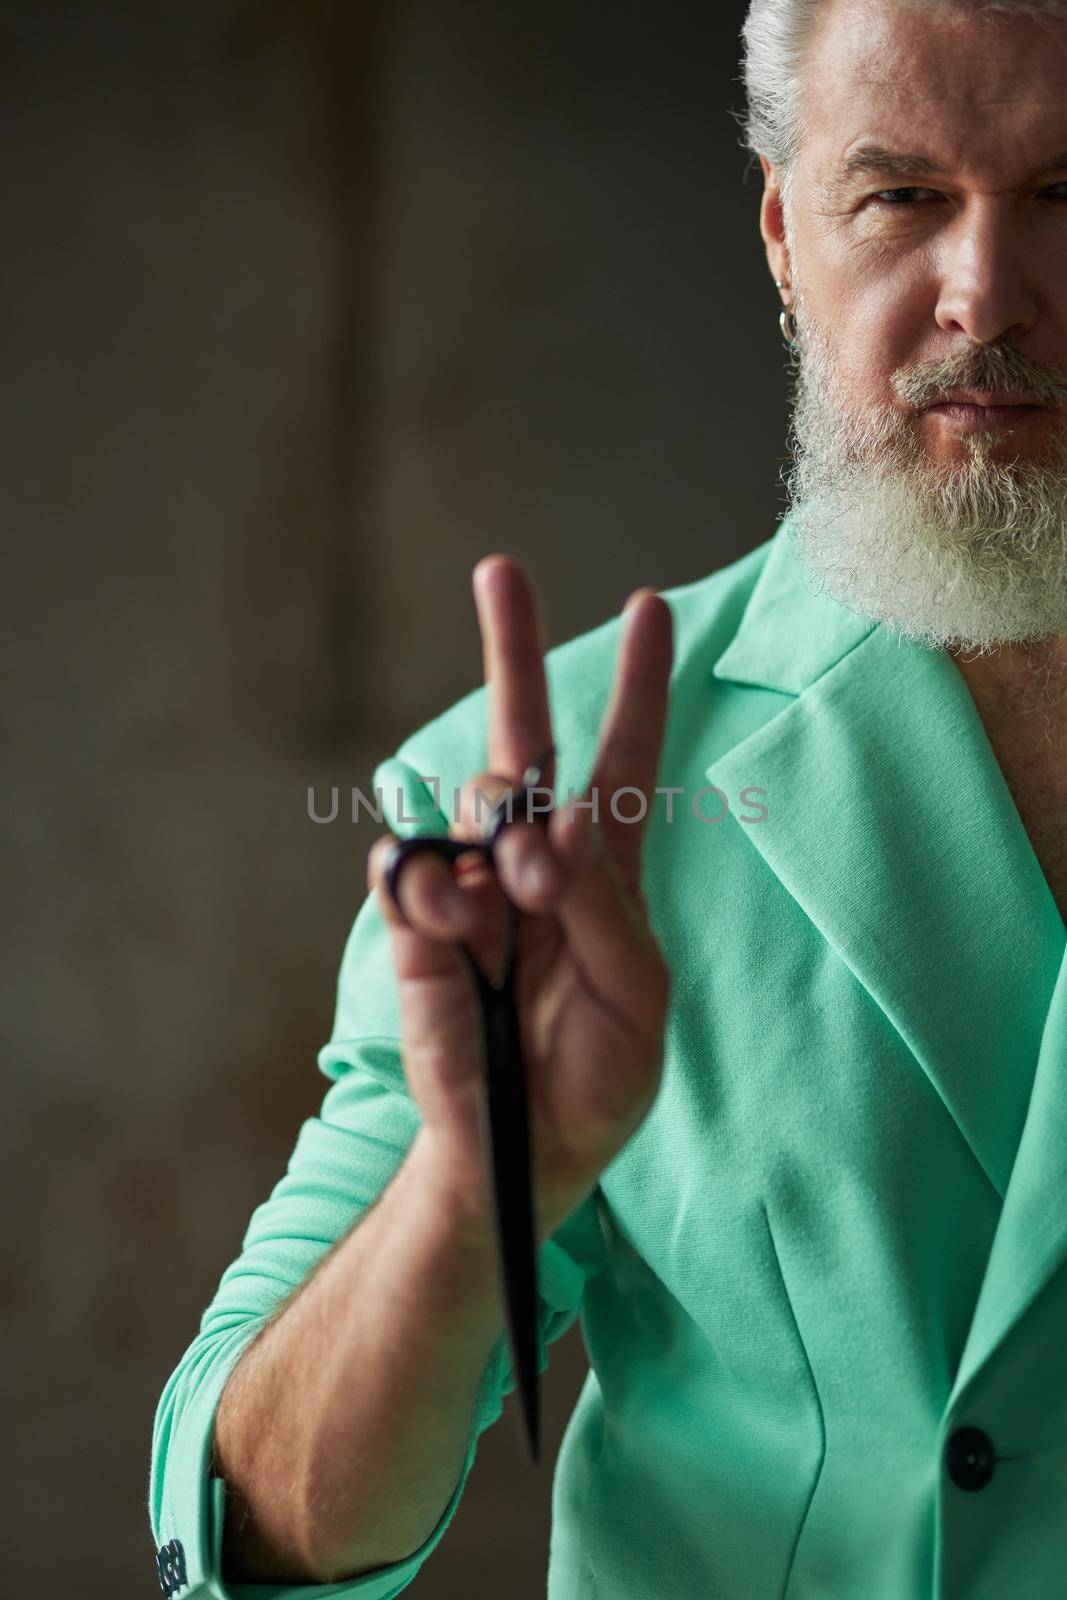 Close up shot of stylish middle aged man with beard wearing colorful outfit looking at camera, showing peace sign while holding sharp barber scissors, posing indoors by friendsstock